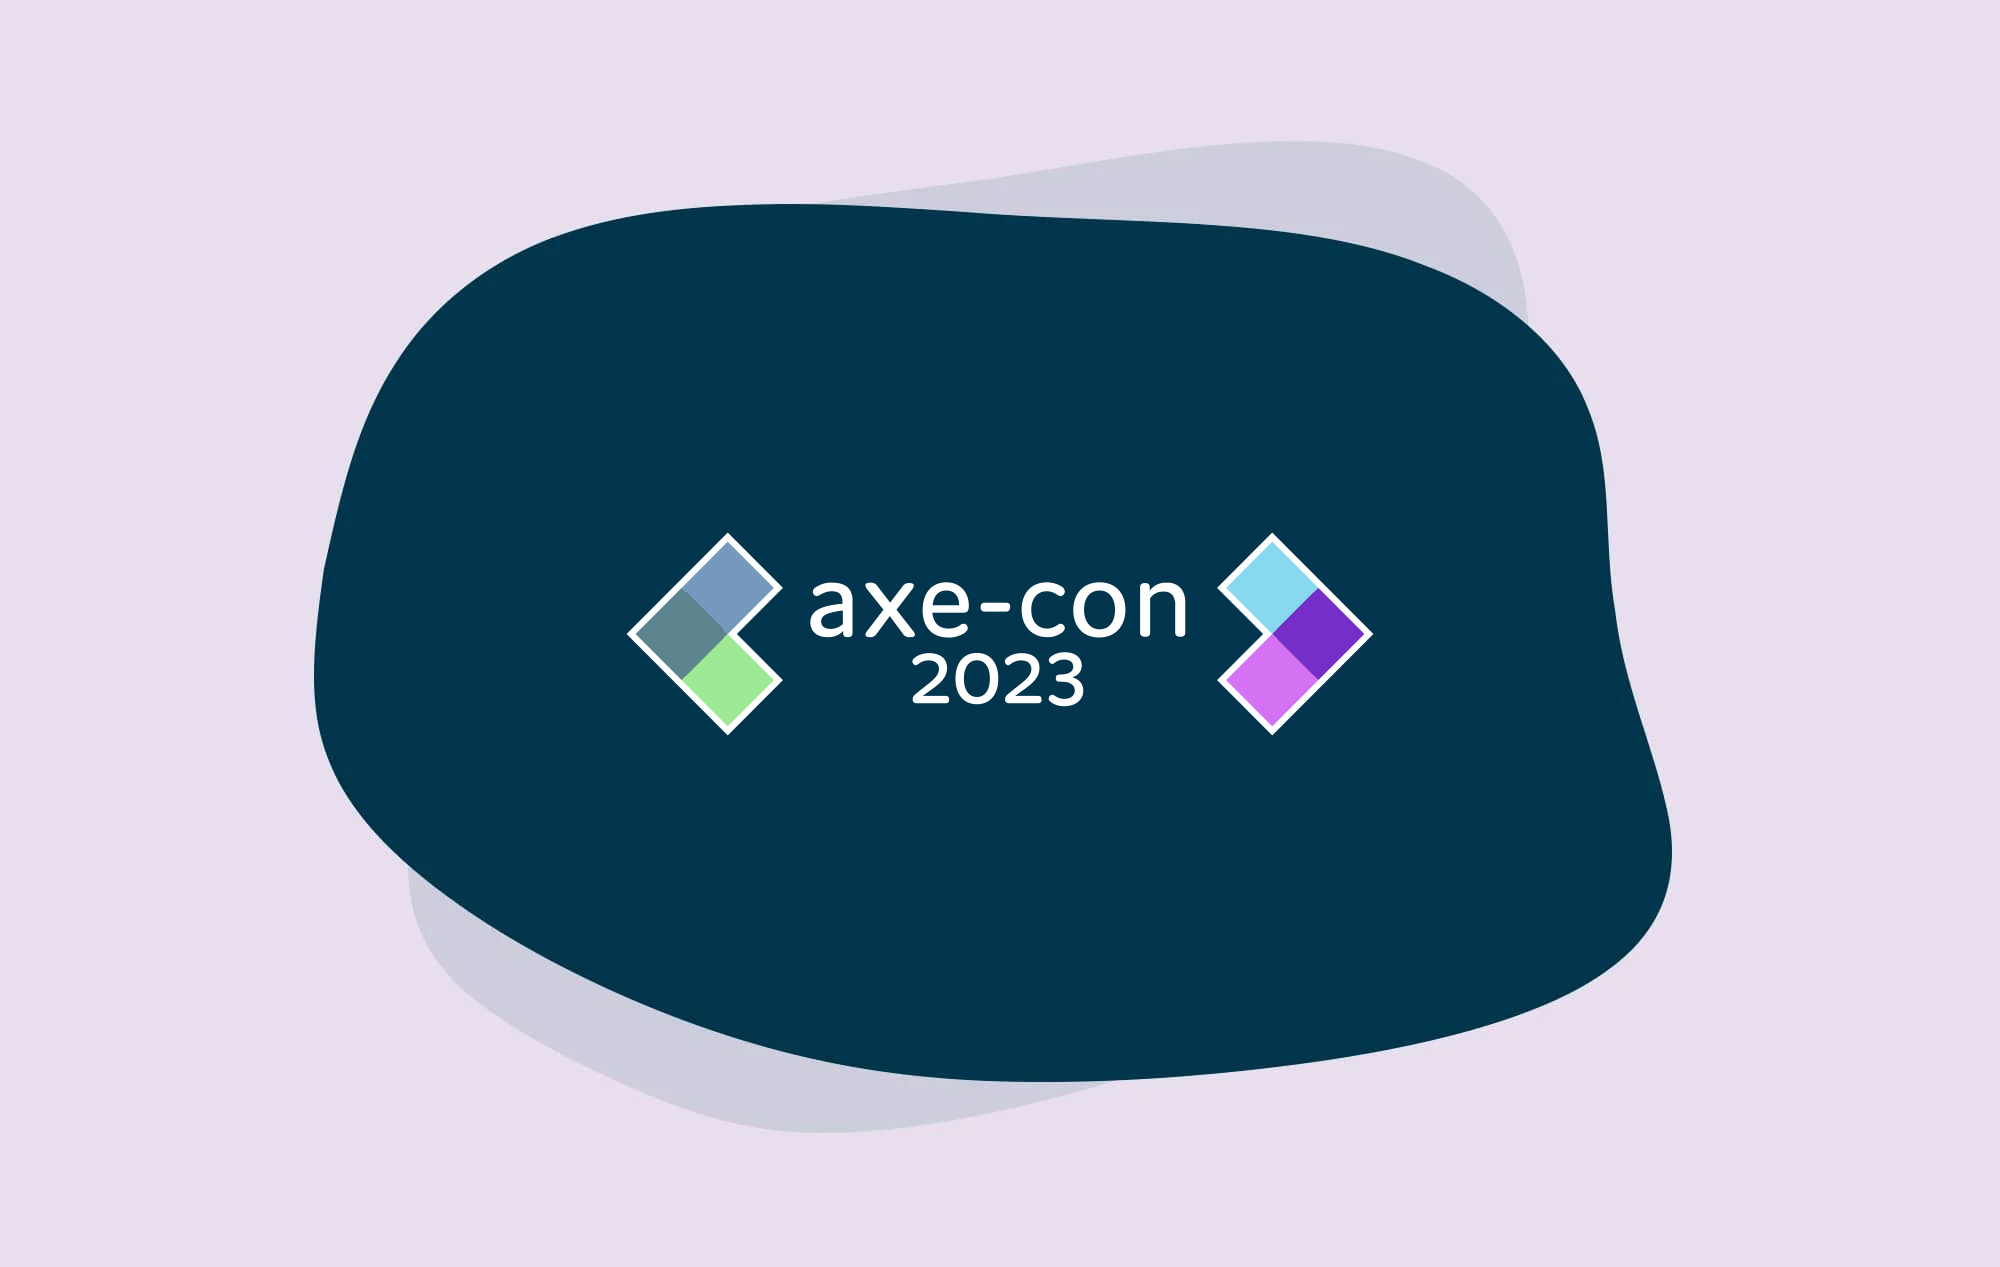 Axe-Con 2023 logo on navy blue bubble with light purple background.